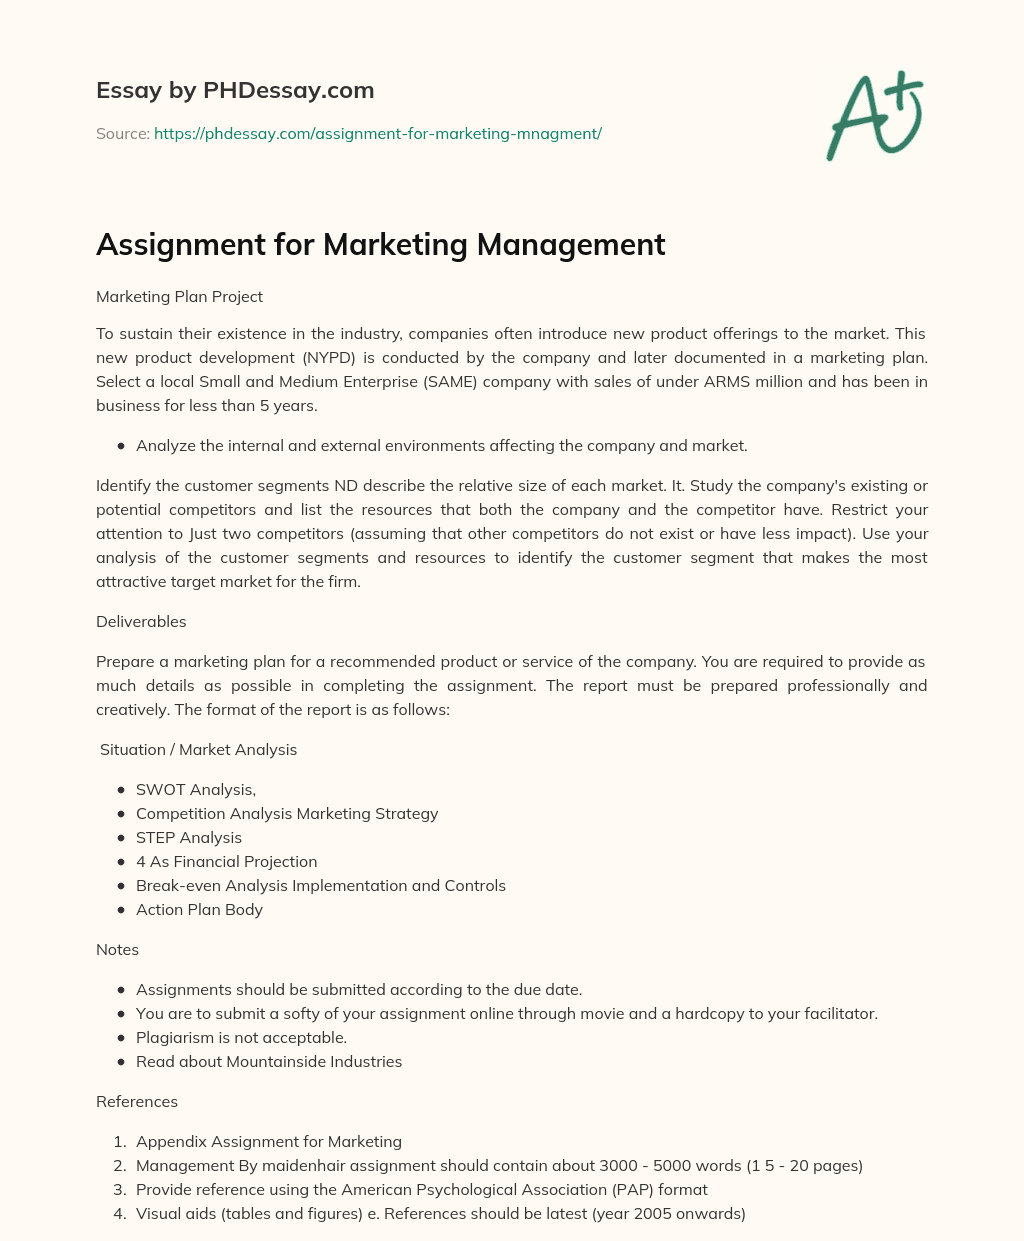 Assignment for Marketing Management essay